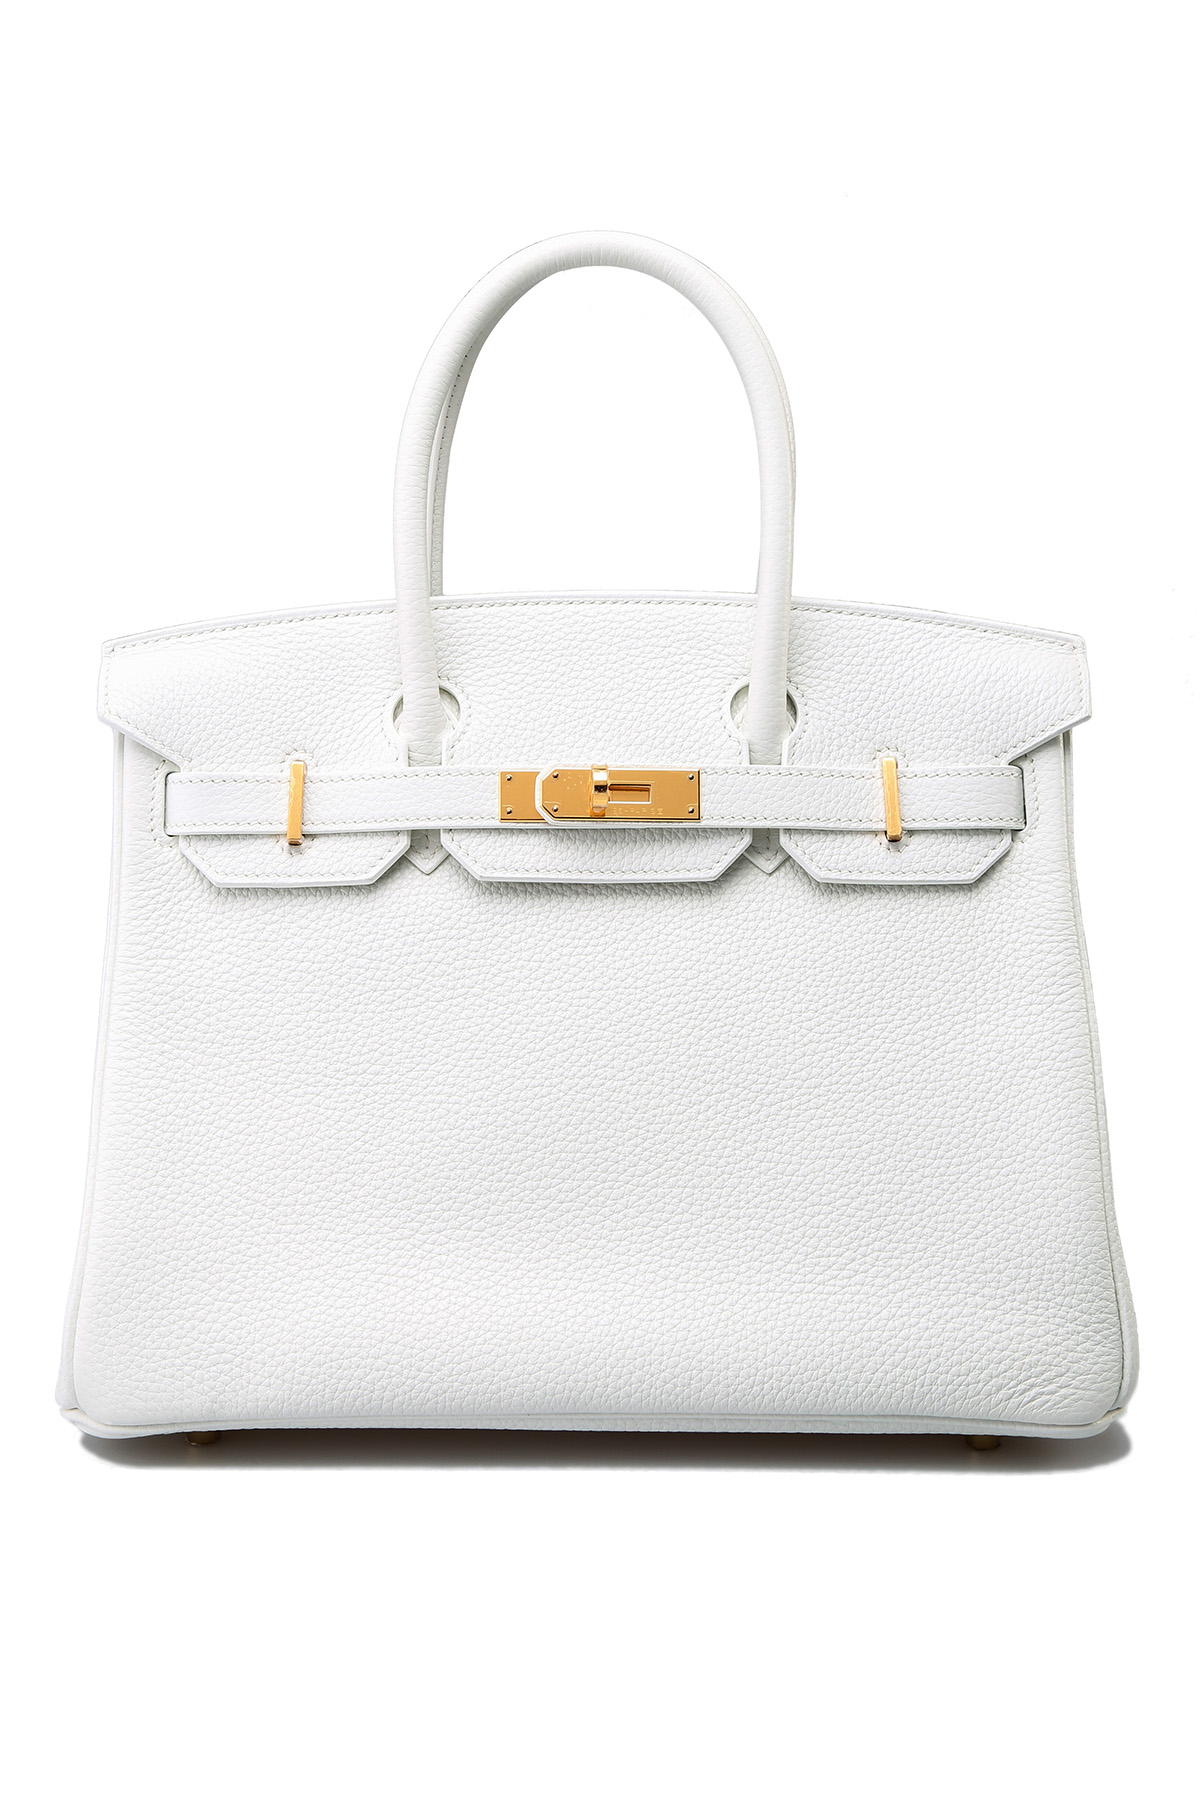 Hermes Birkin 30 Bag White Clemence Leather with Gold Hardware – Mightychic